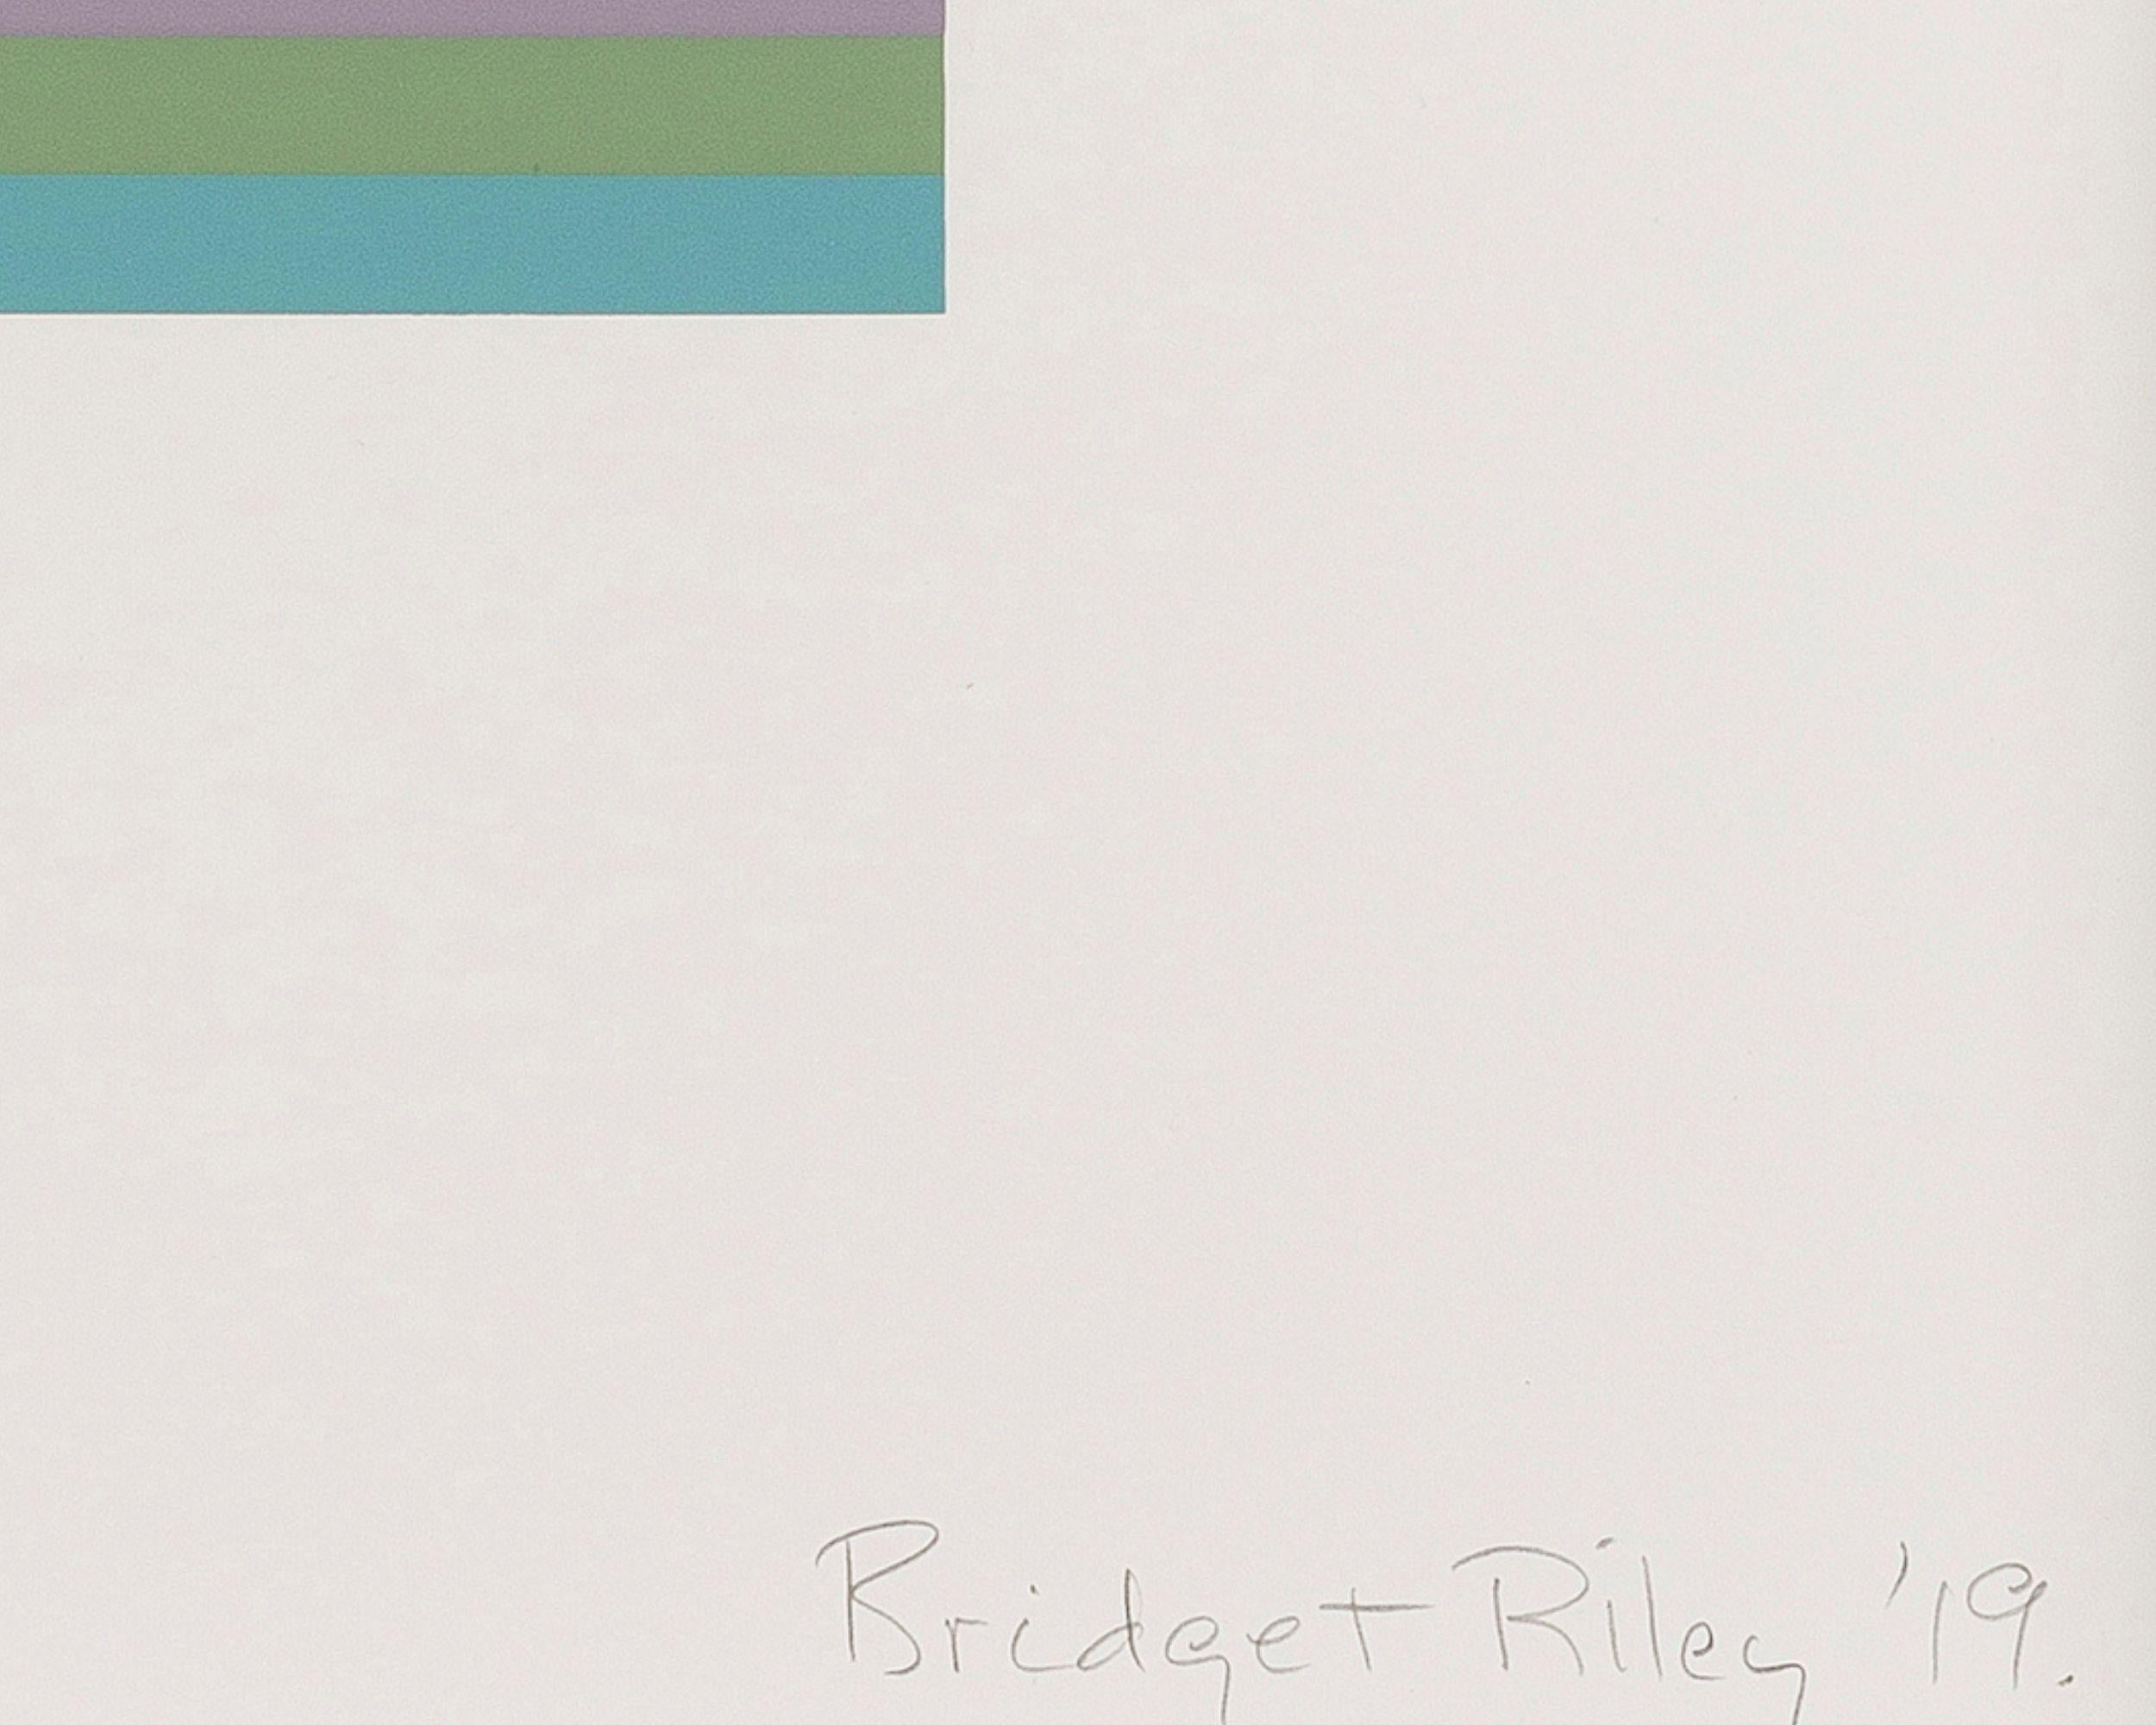 BRIDGET RILEY  
Intervals 1, 2018
Screenprint in colours, on Fabriano 5 paper
Signed, titled, dated and numbered from the edition of 175
Printed by Artizan Editions, Forest of Dean
Image: 24.2 x 15.3 cm (9.5 x 6.0 in) 
Sheet: 51.2 x 40.6 cm (20.1 x